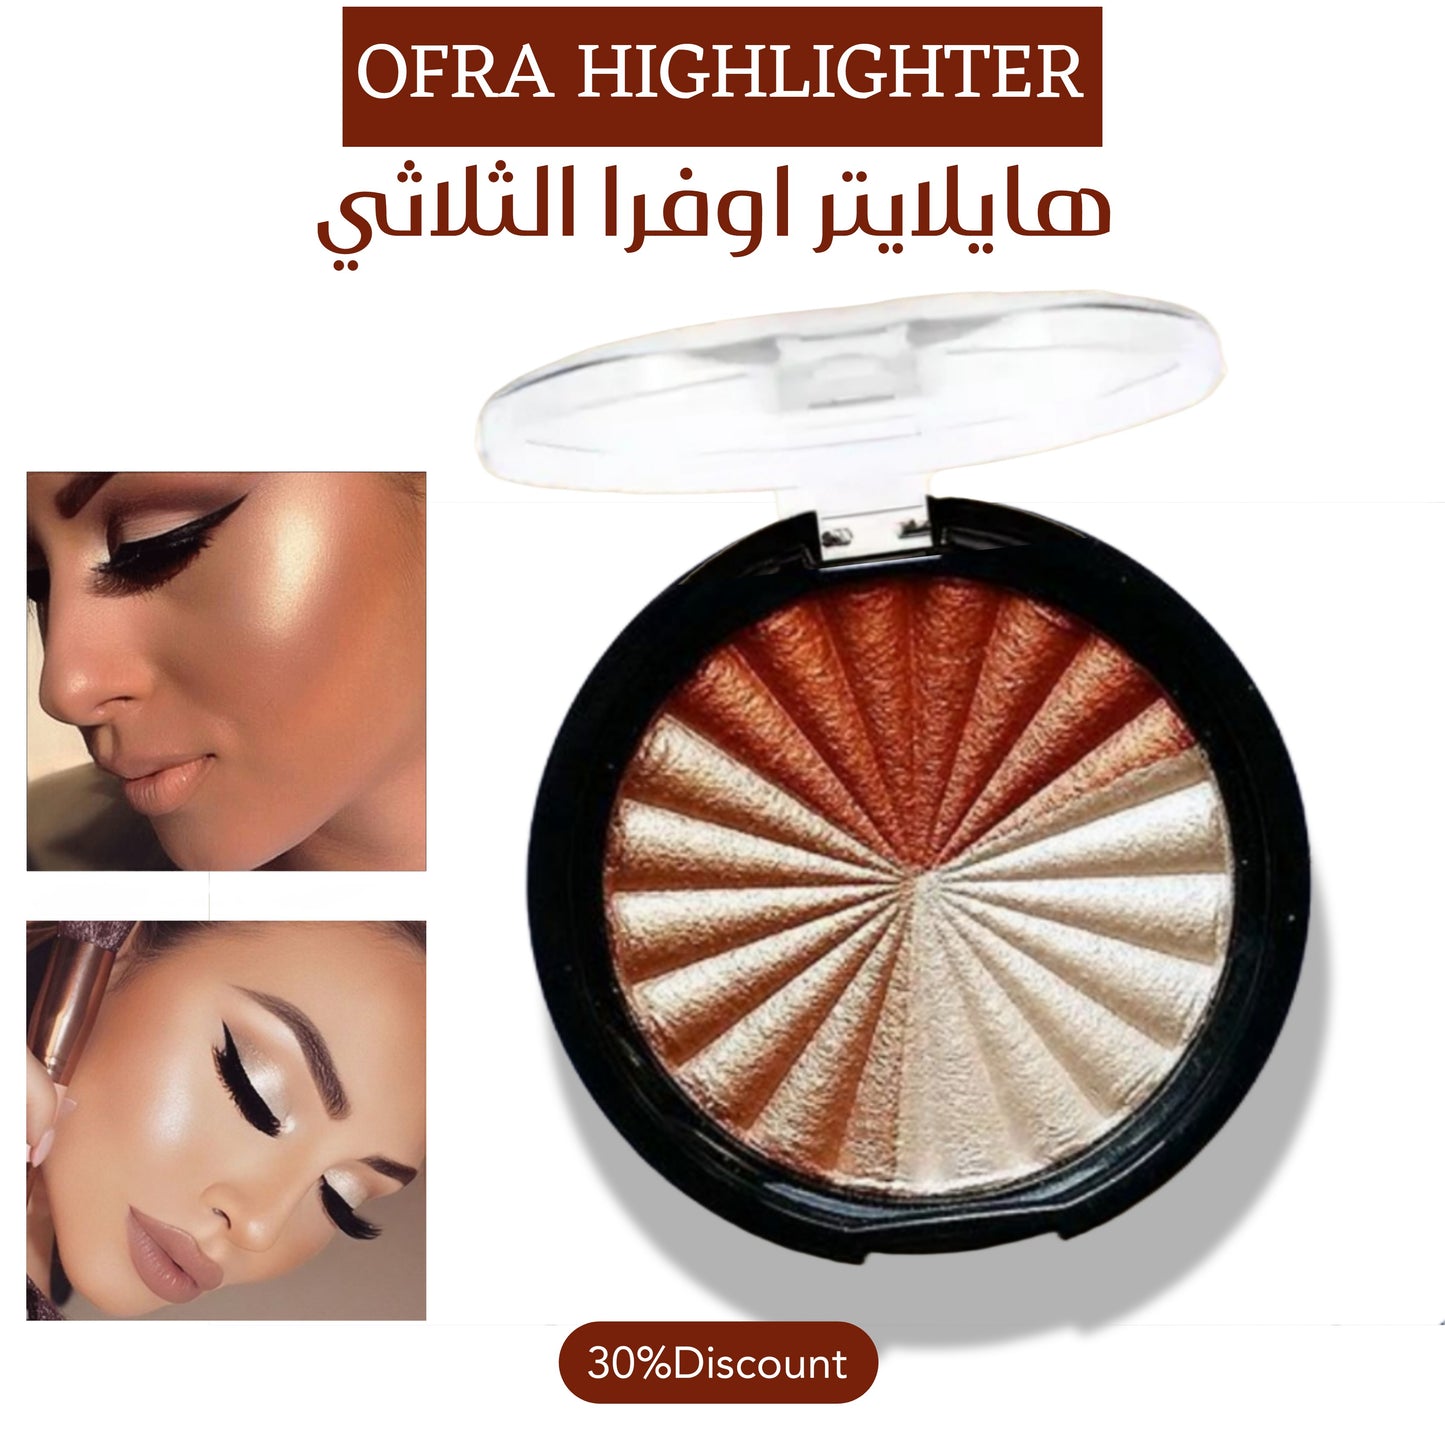 Ofra face highlighter box of 3 colors, cream/gold/beige